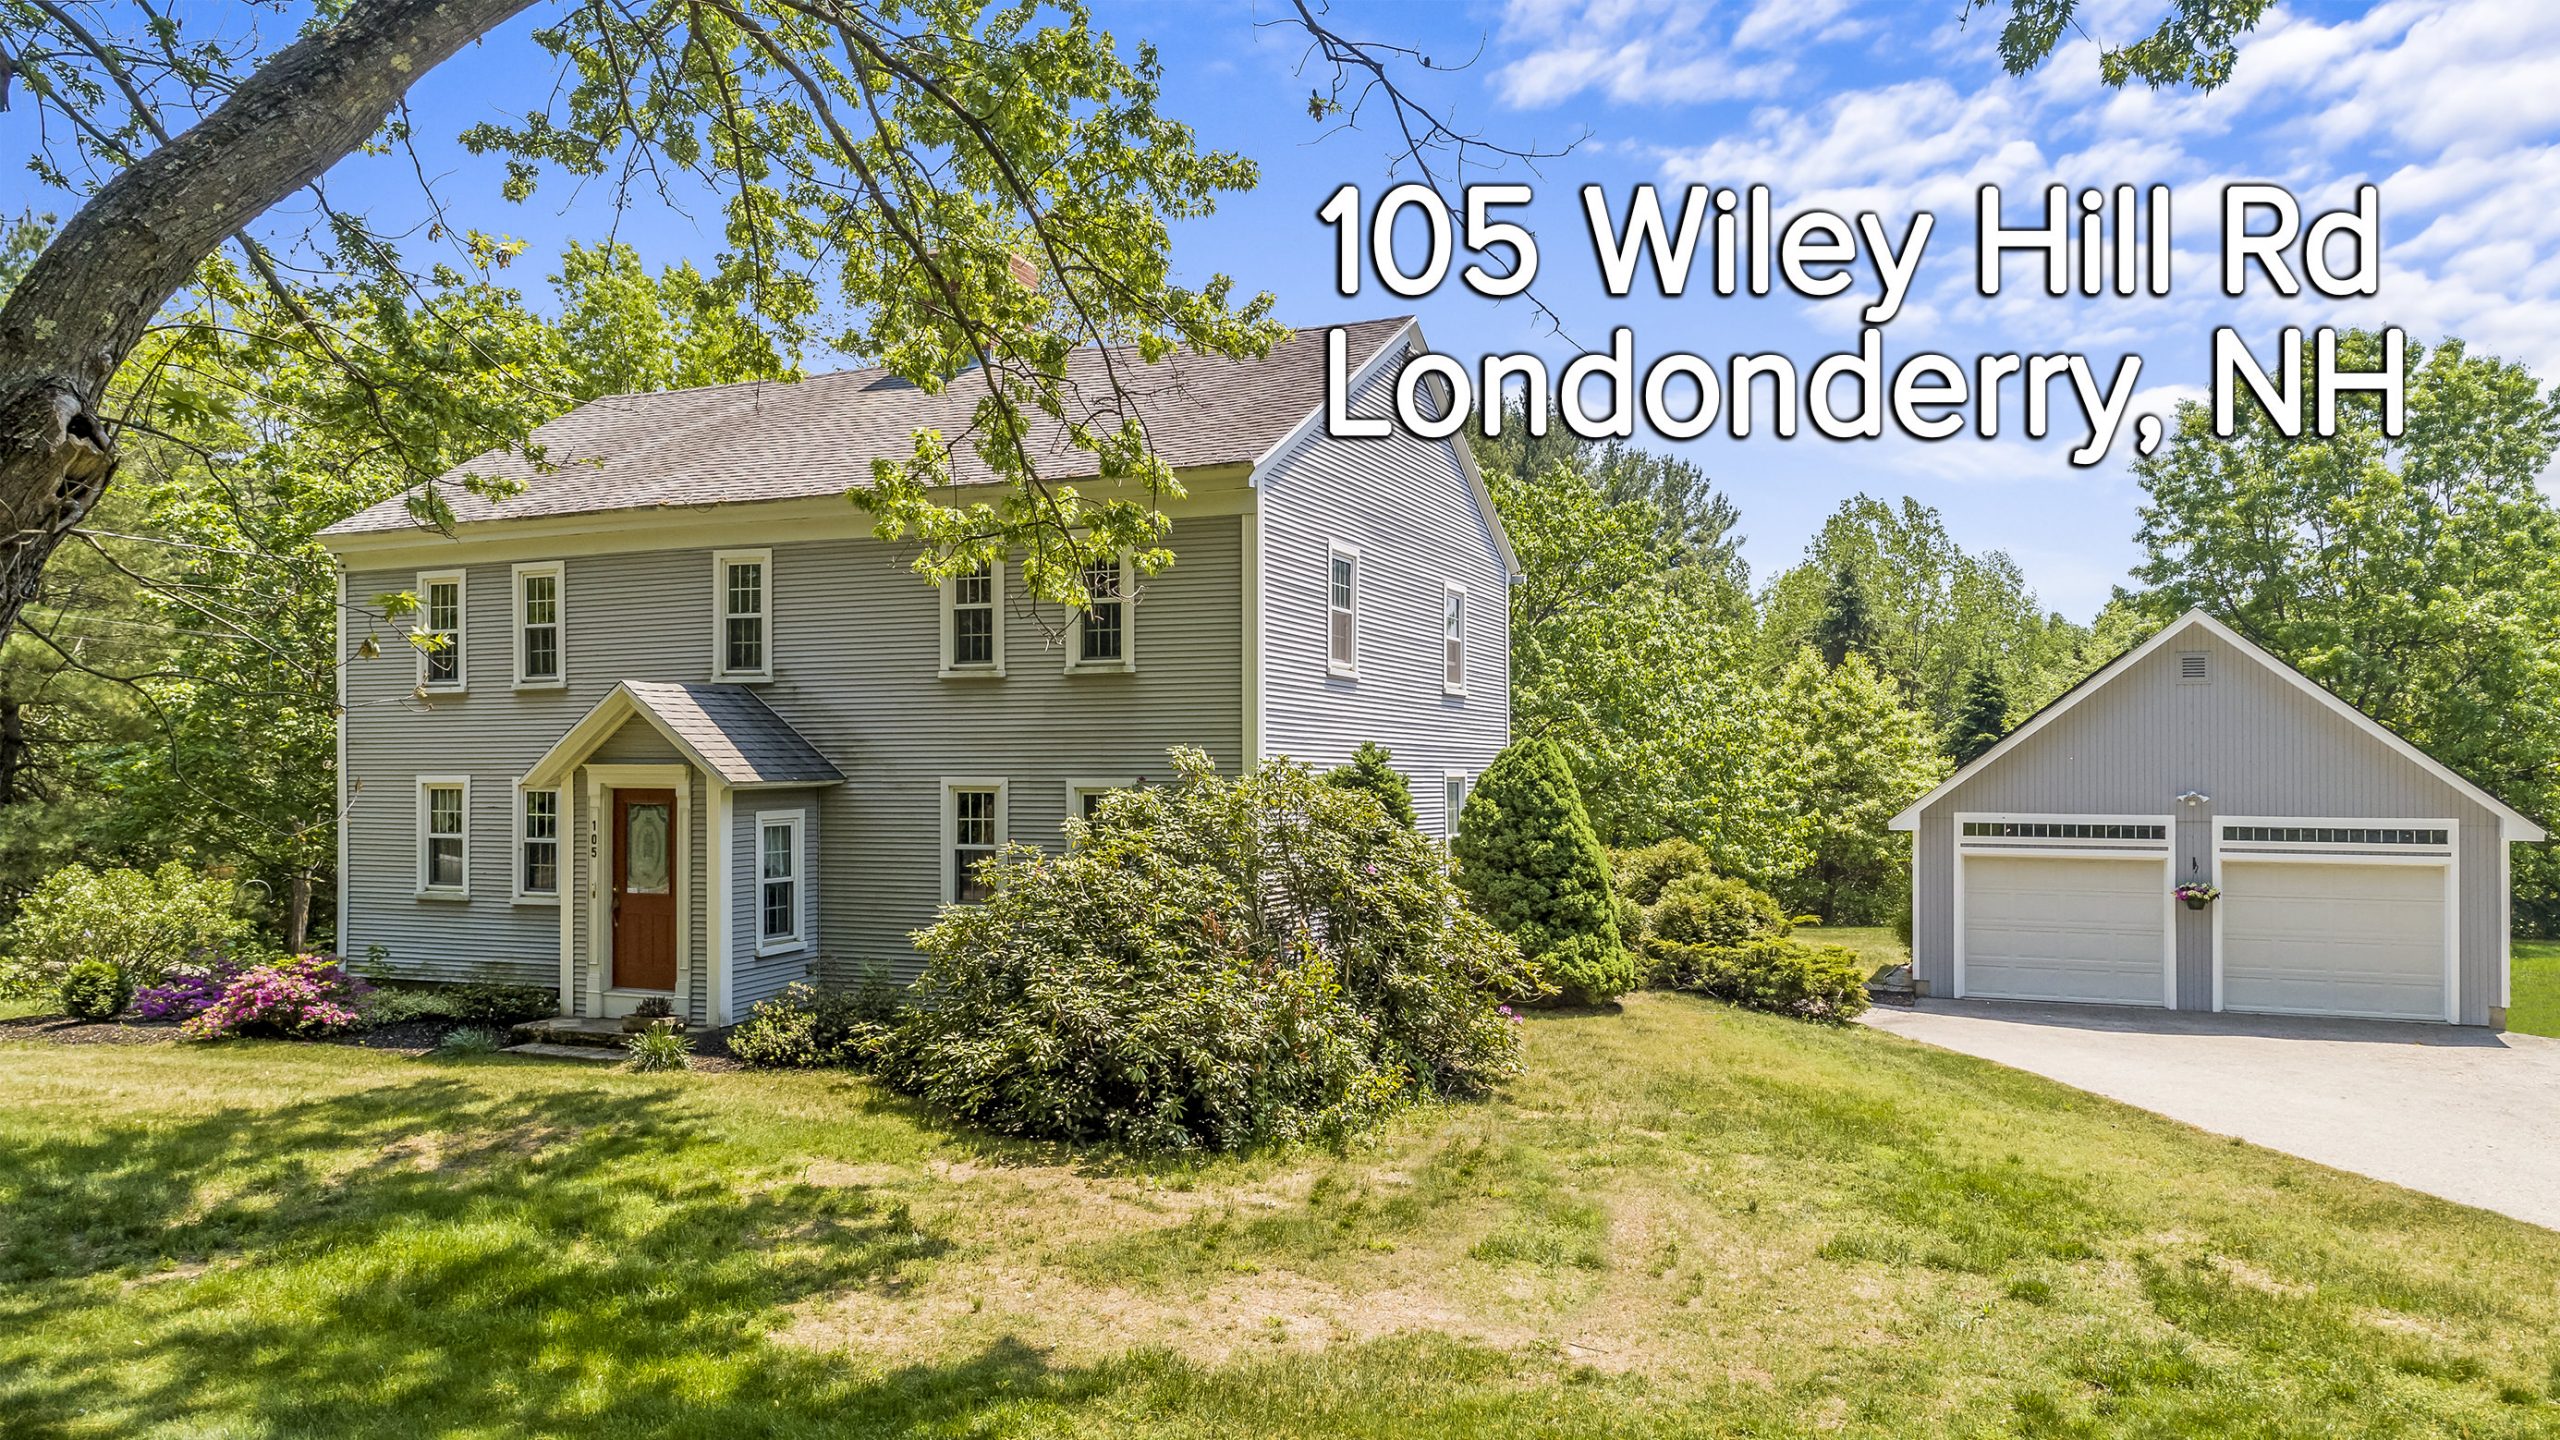 105 Wiley HIll Rd Londonderry NH 03053